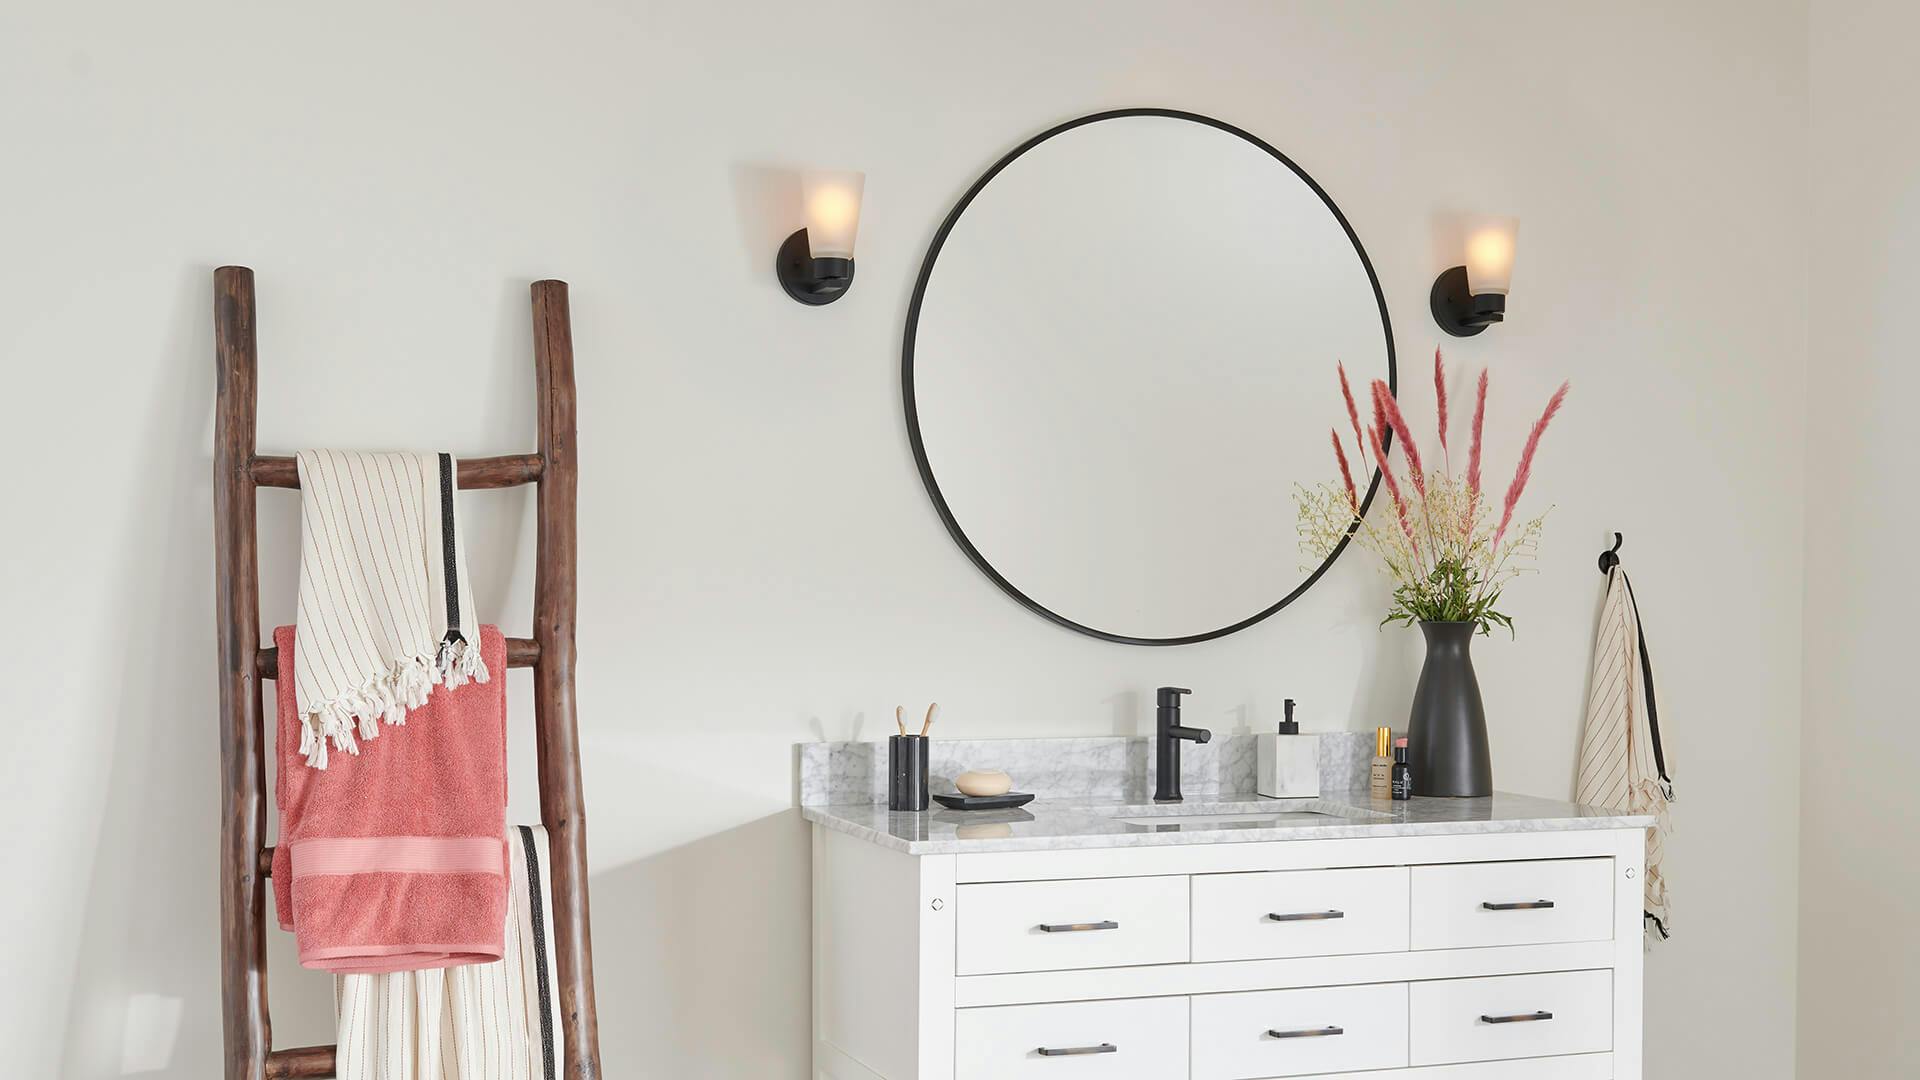 Contemporary bathroom with ladder rack for towels and round mirror vanity, featuring two Stamos sconces on either side.